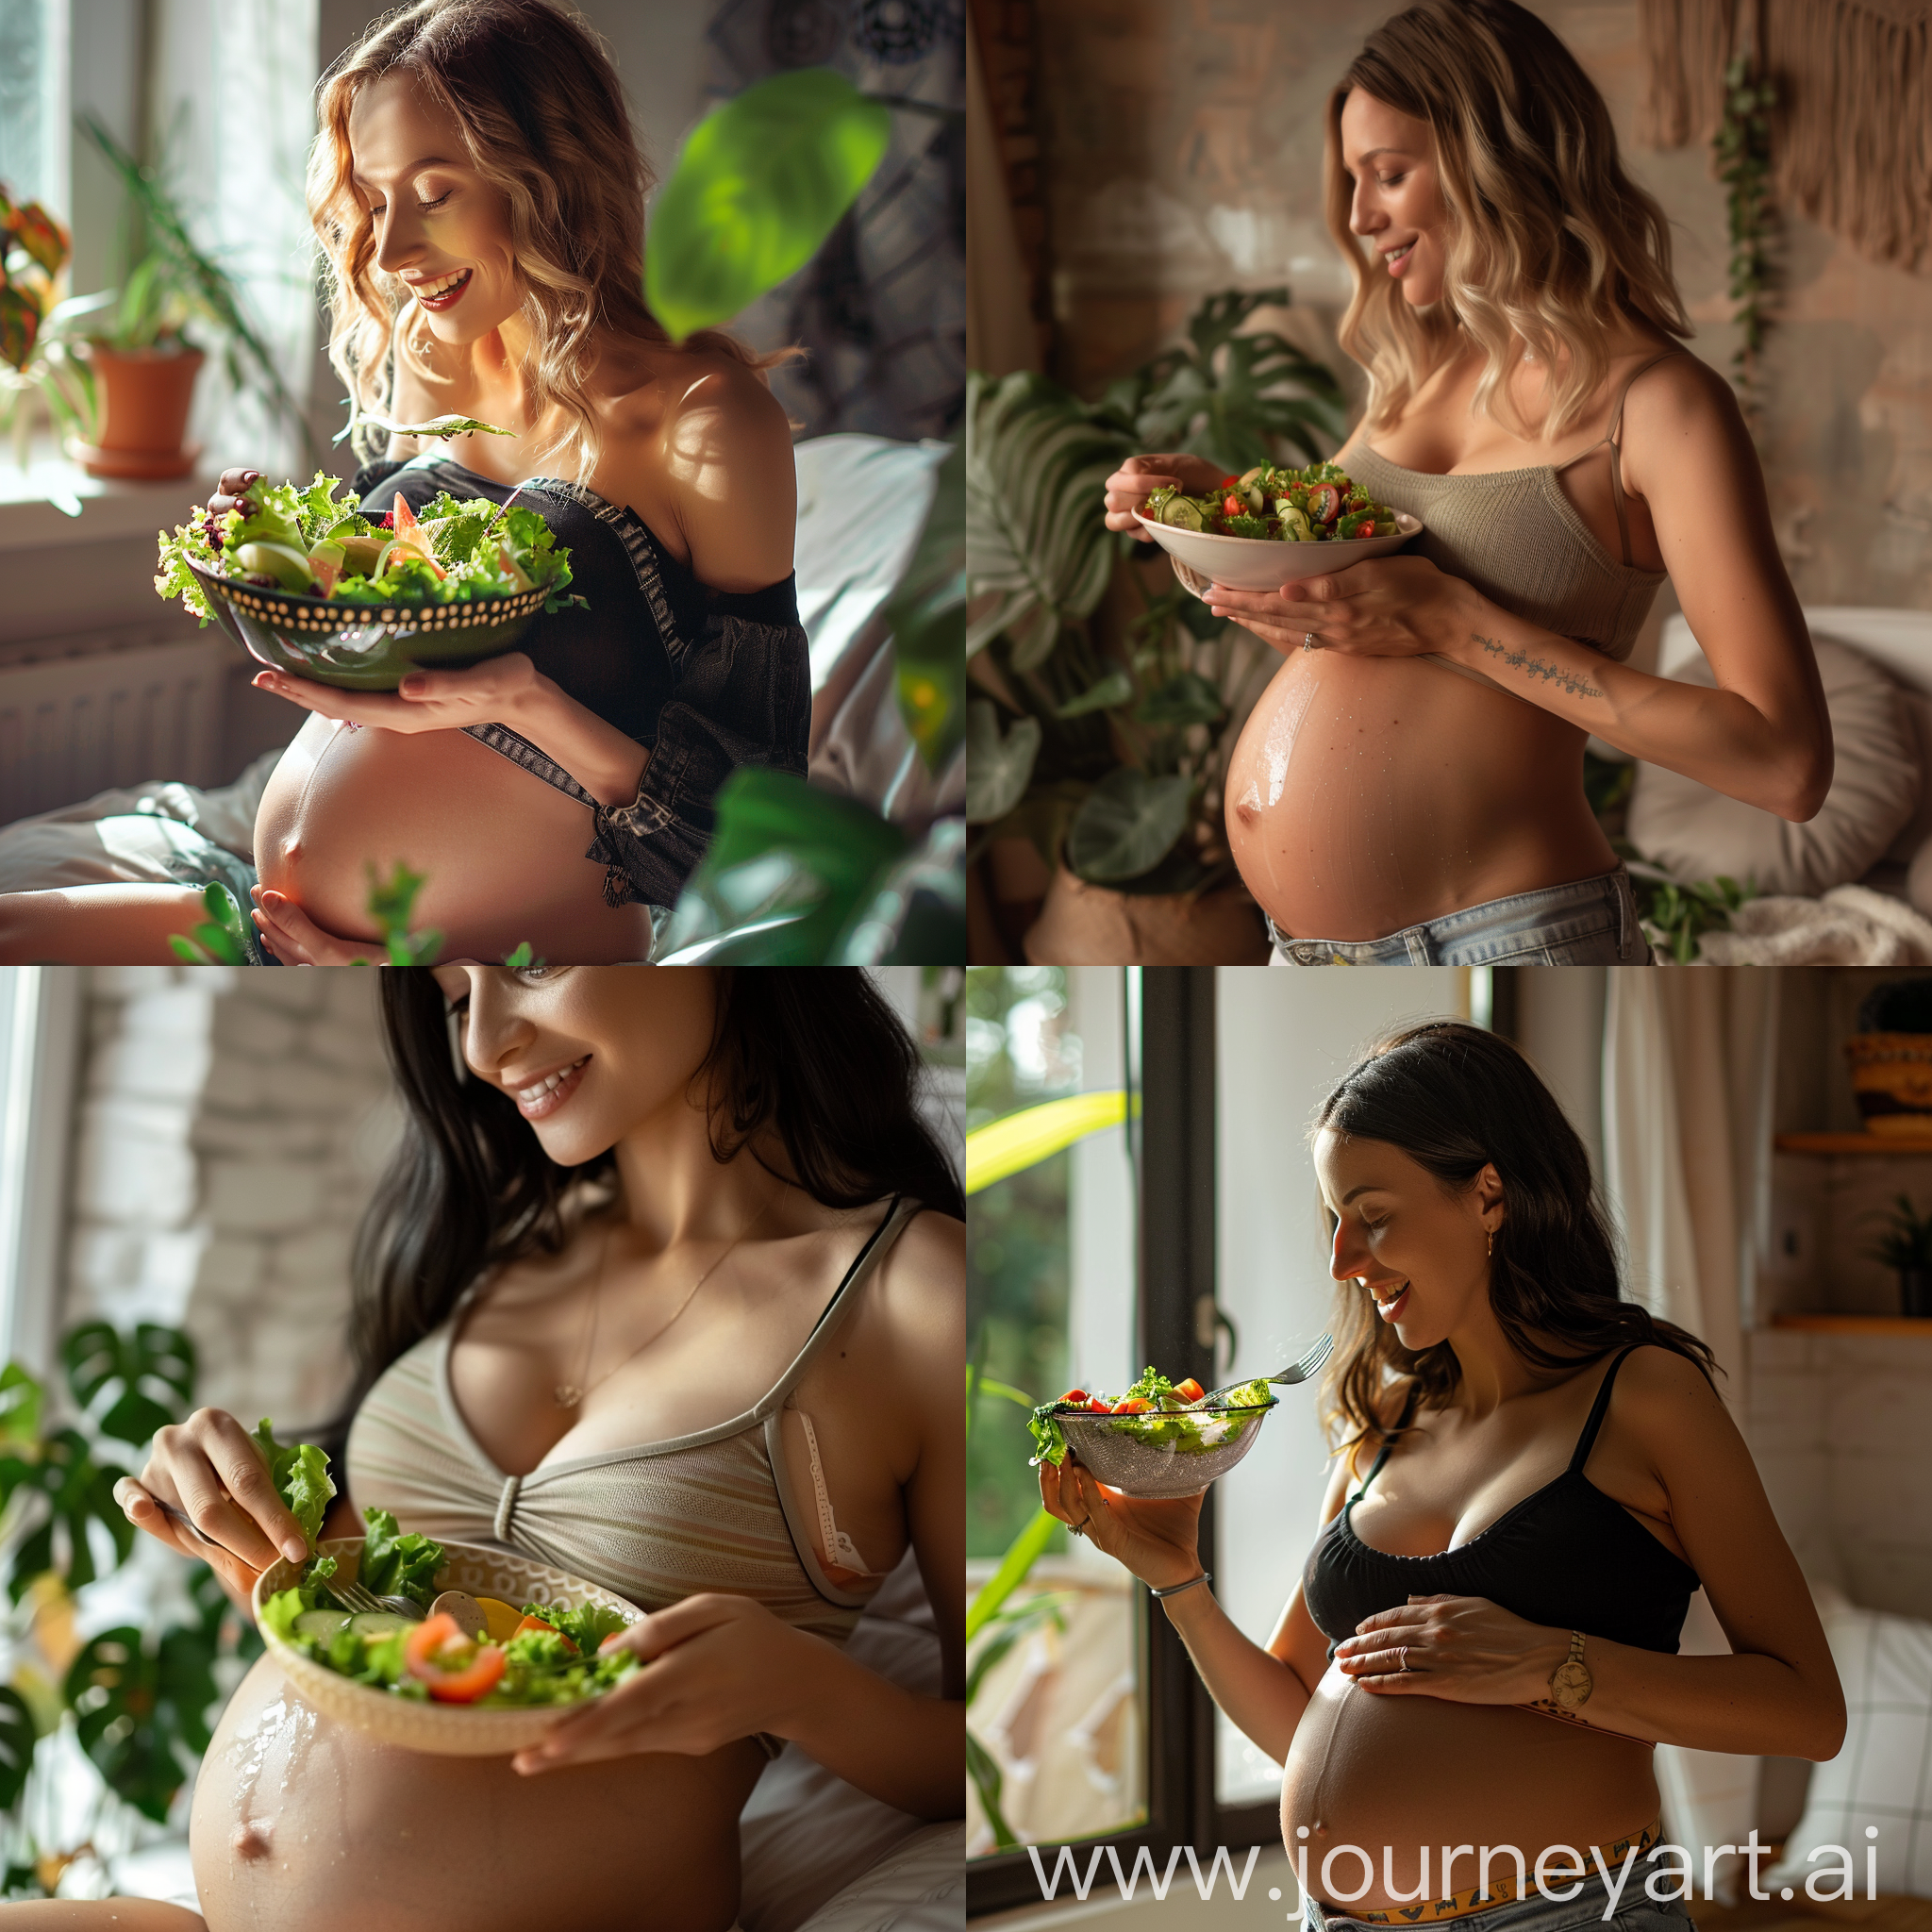 a pregnant woman in crop top eating a salad